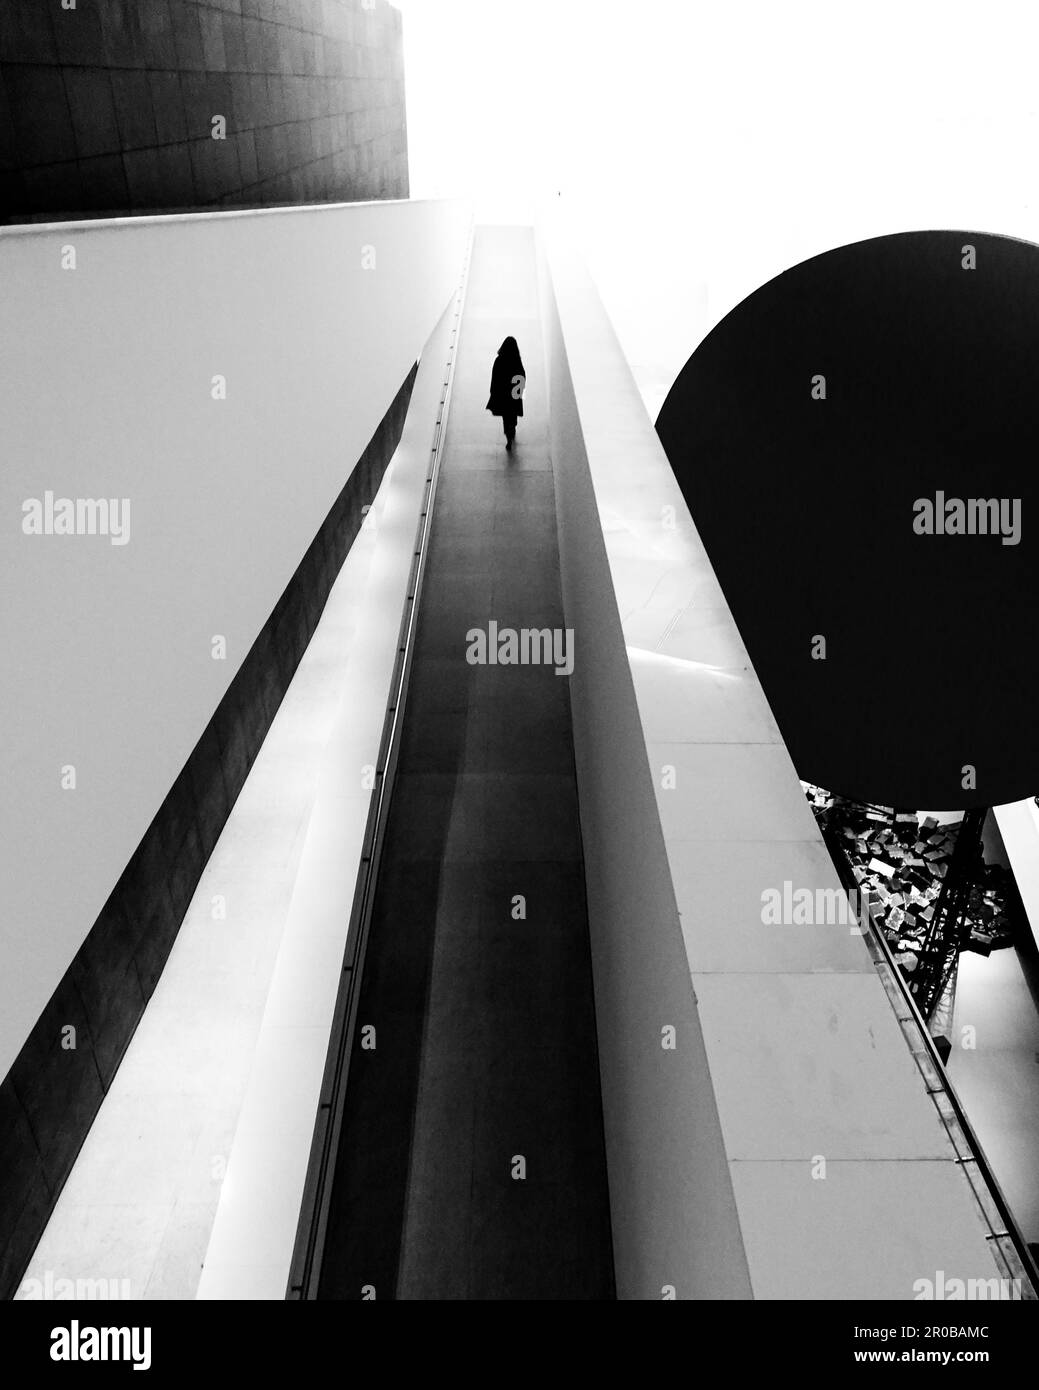 A silhouetted figure walking on the rooftop of a building in grayscale Stock Photo